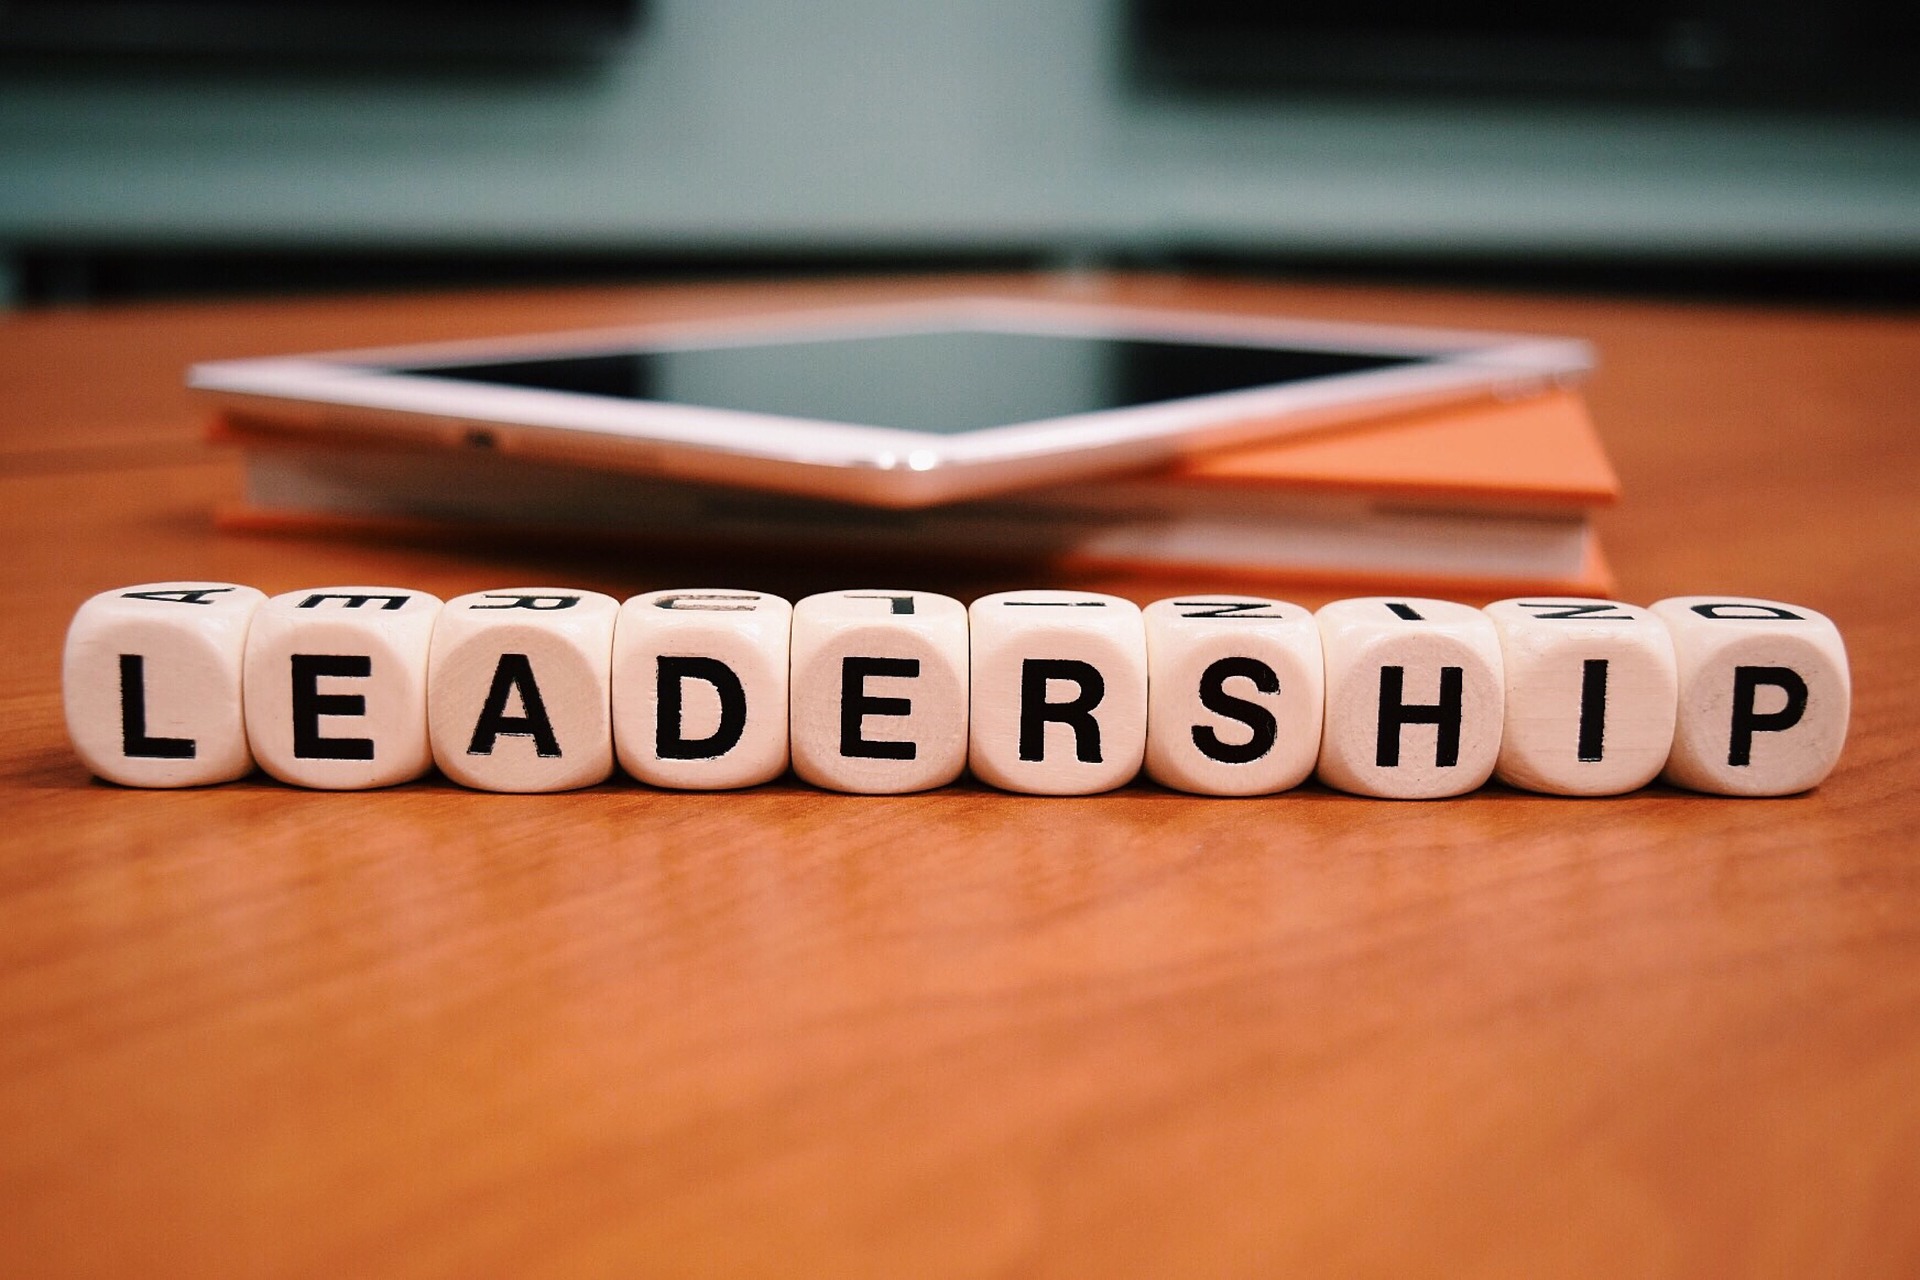 Great leaders-the word leadership spelled out with letter tiles on a table